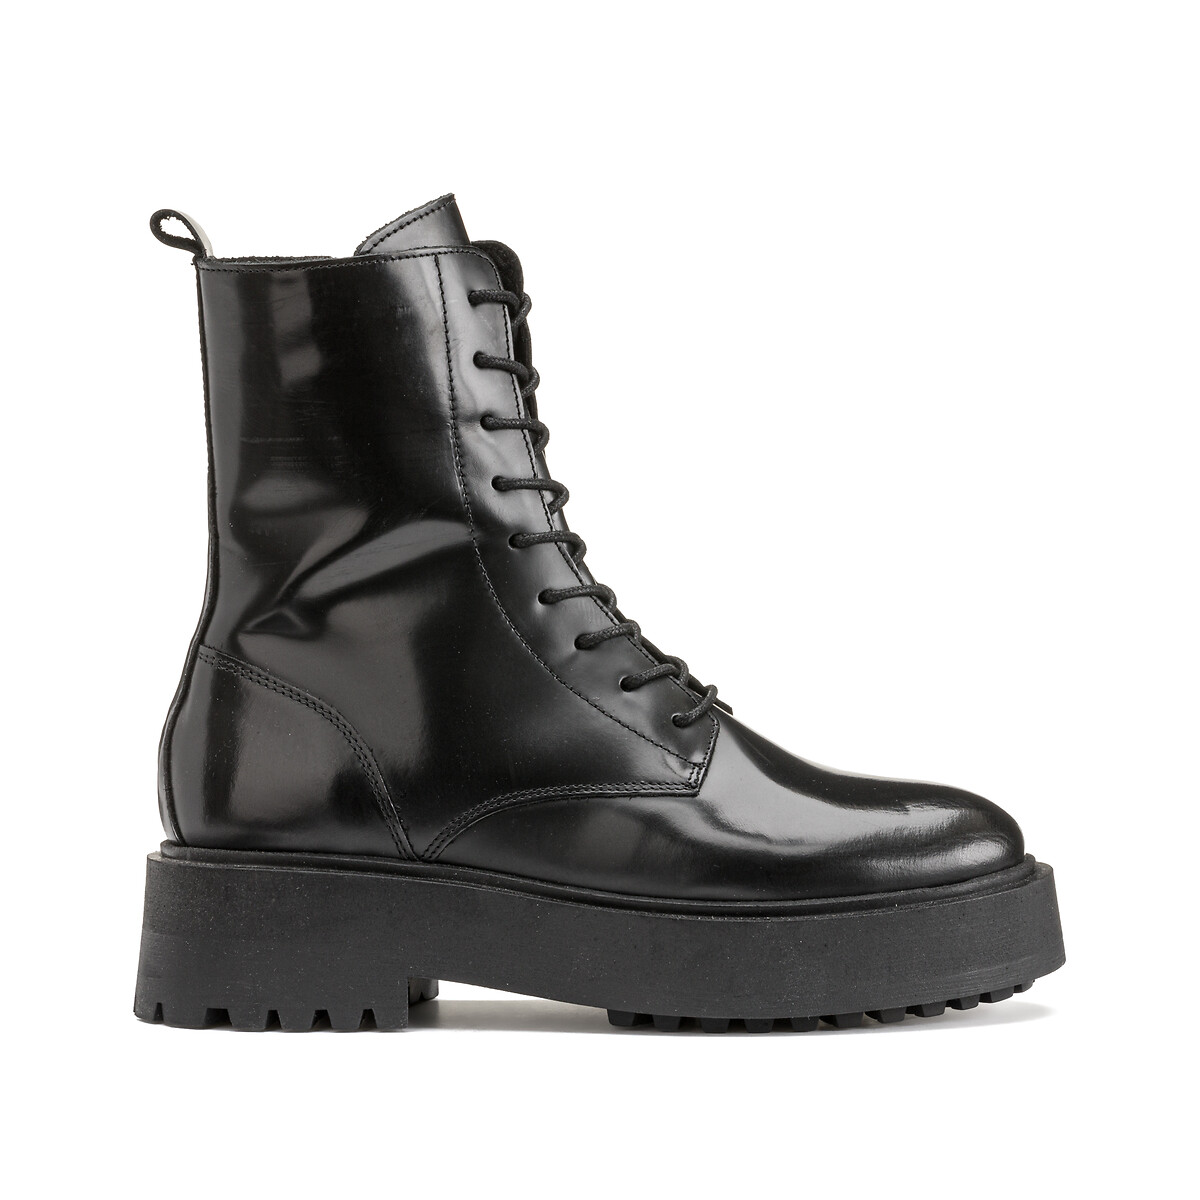 Lace-up ankle boots in leather, black, La Redoute Collections | La Redoute